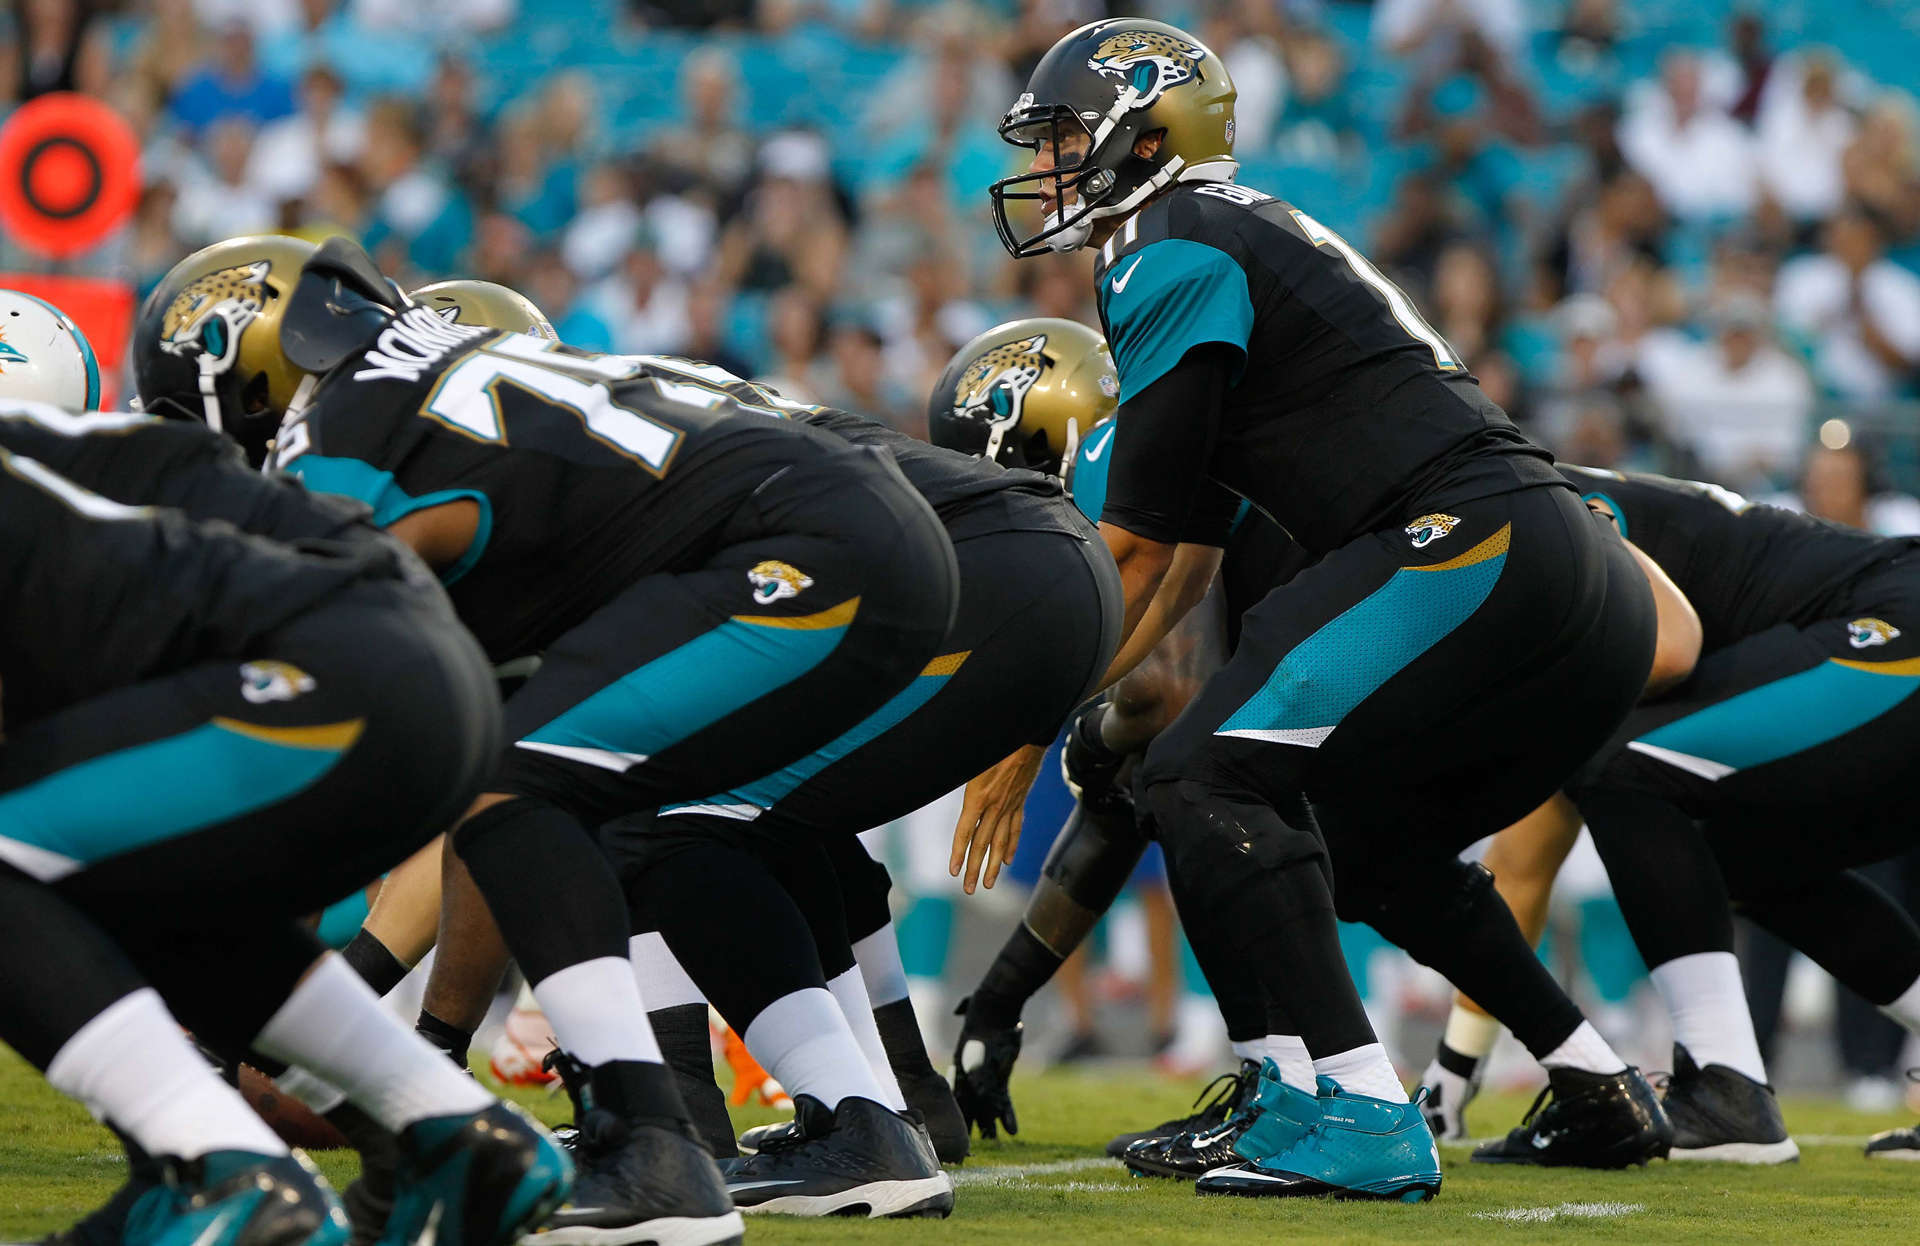 Charitybuzz Tickets To A Jacksonville Jaguars